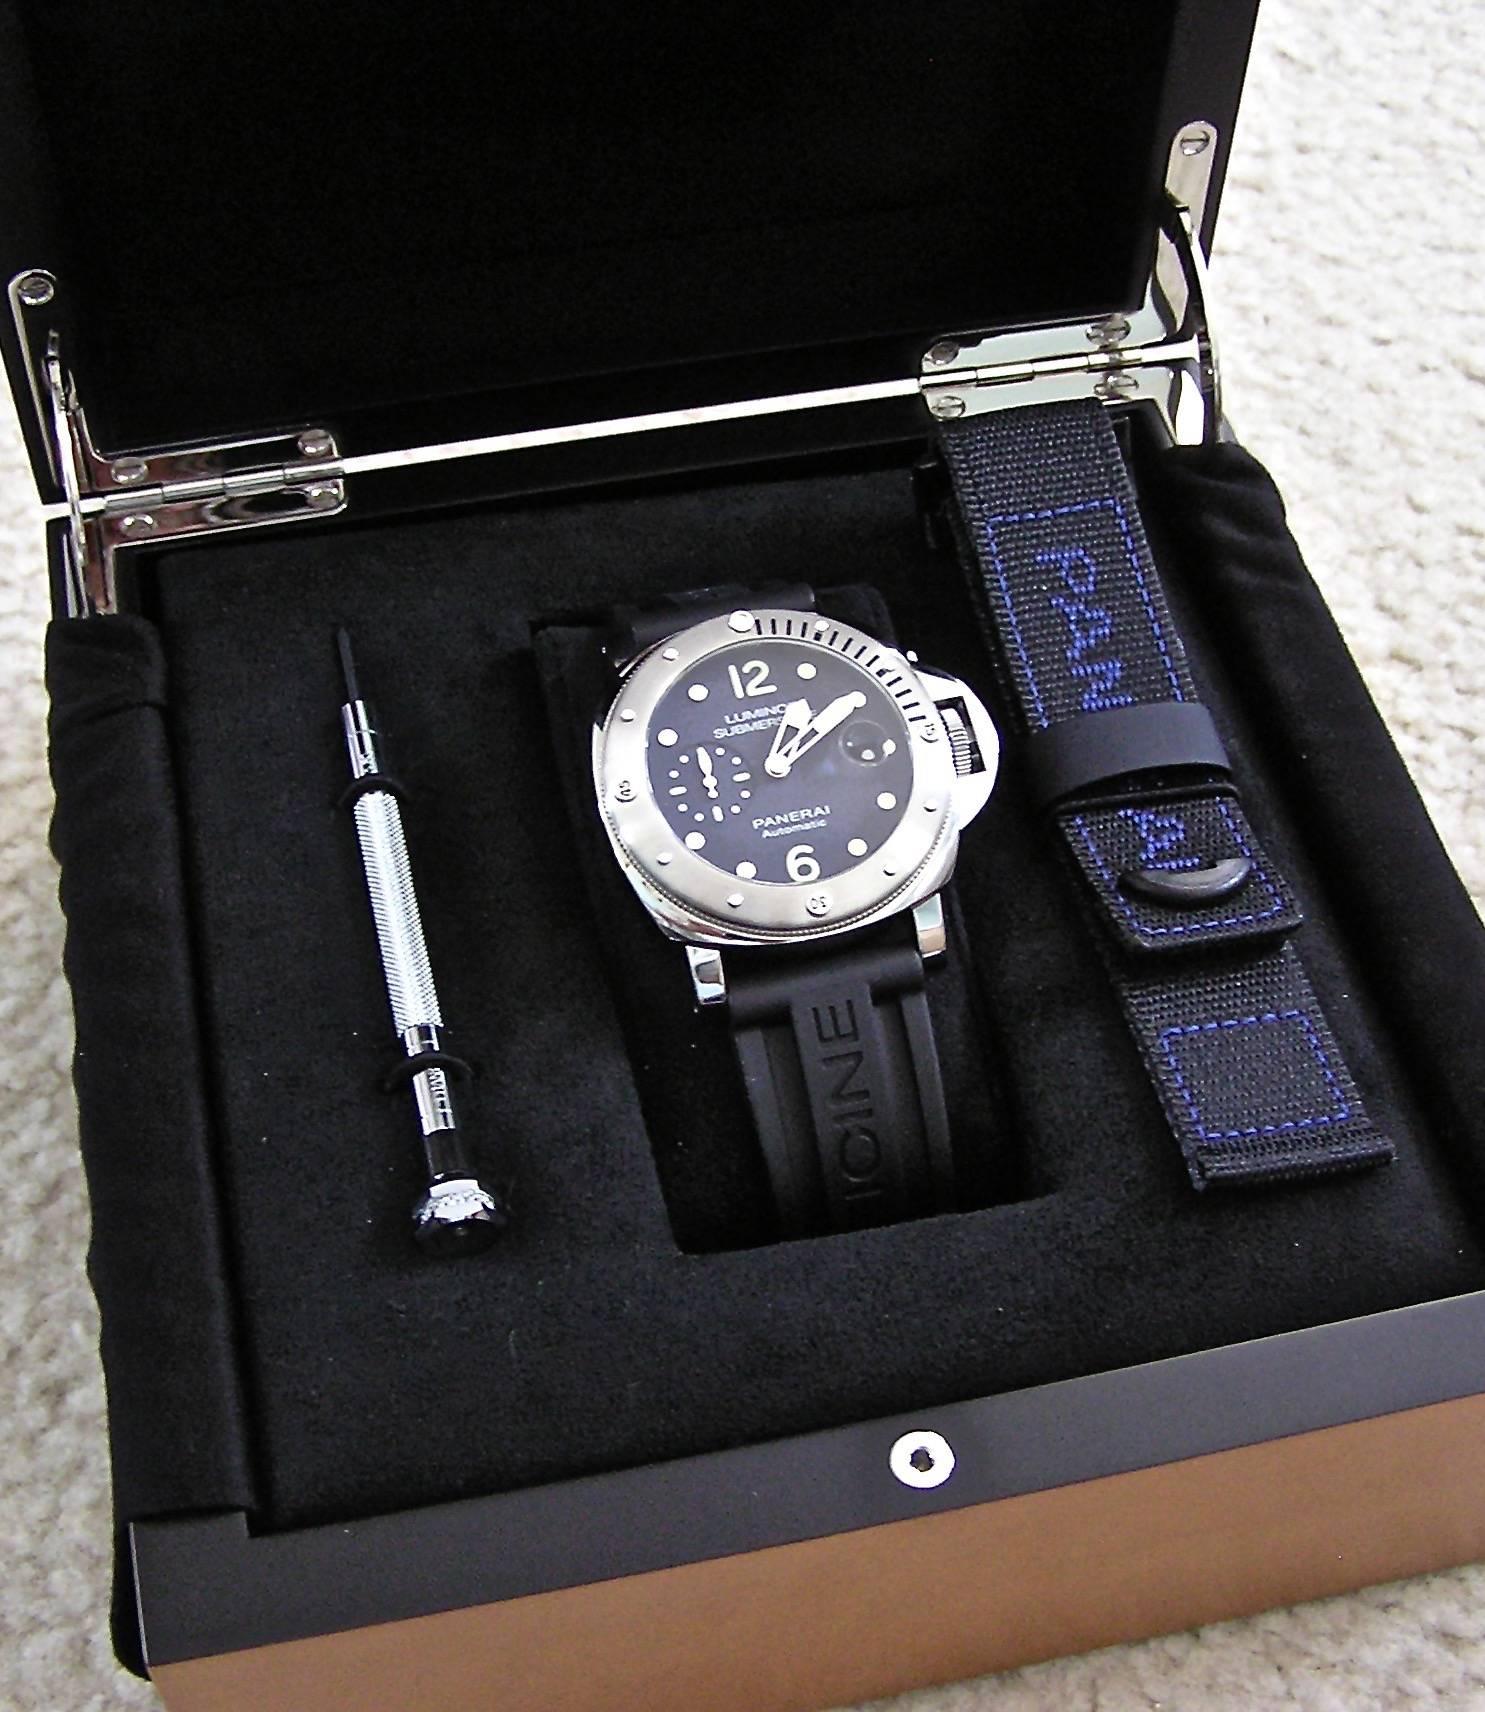 This great watch is Stainless Steel, 44mm.  Rare unique Blue Dial (most Panerai watches have a Black Dial). Rubber strap and canvas velcro strap.  Automatic movement. Limited Edition of 100 watches for the entire world!  They sold out within 1 hour!